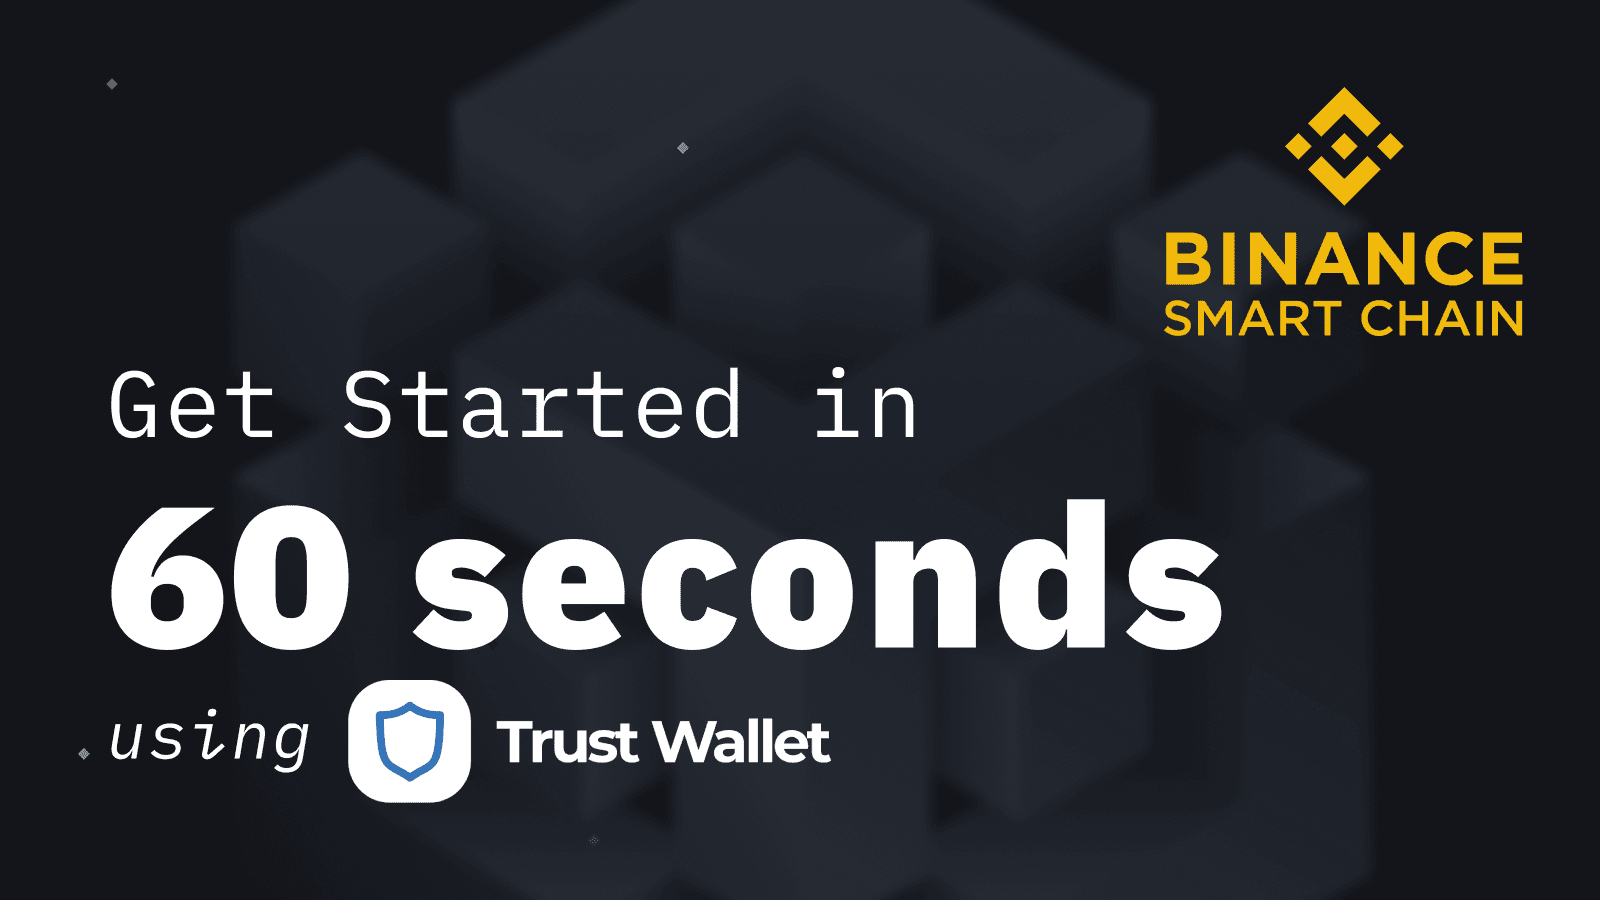 How to Set Up and Use Trust Wallet for Binance Smart Chain